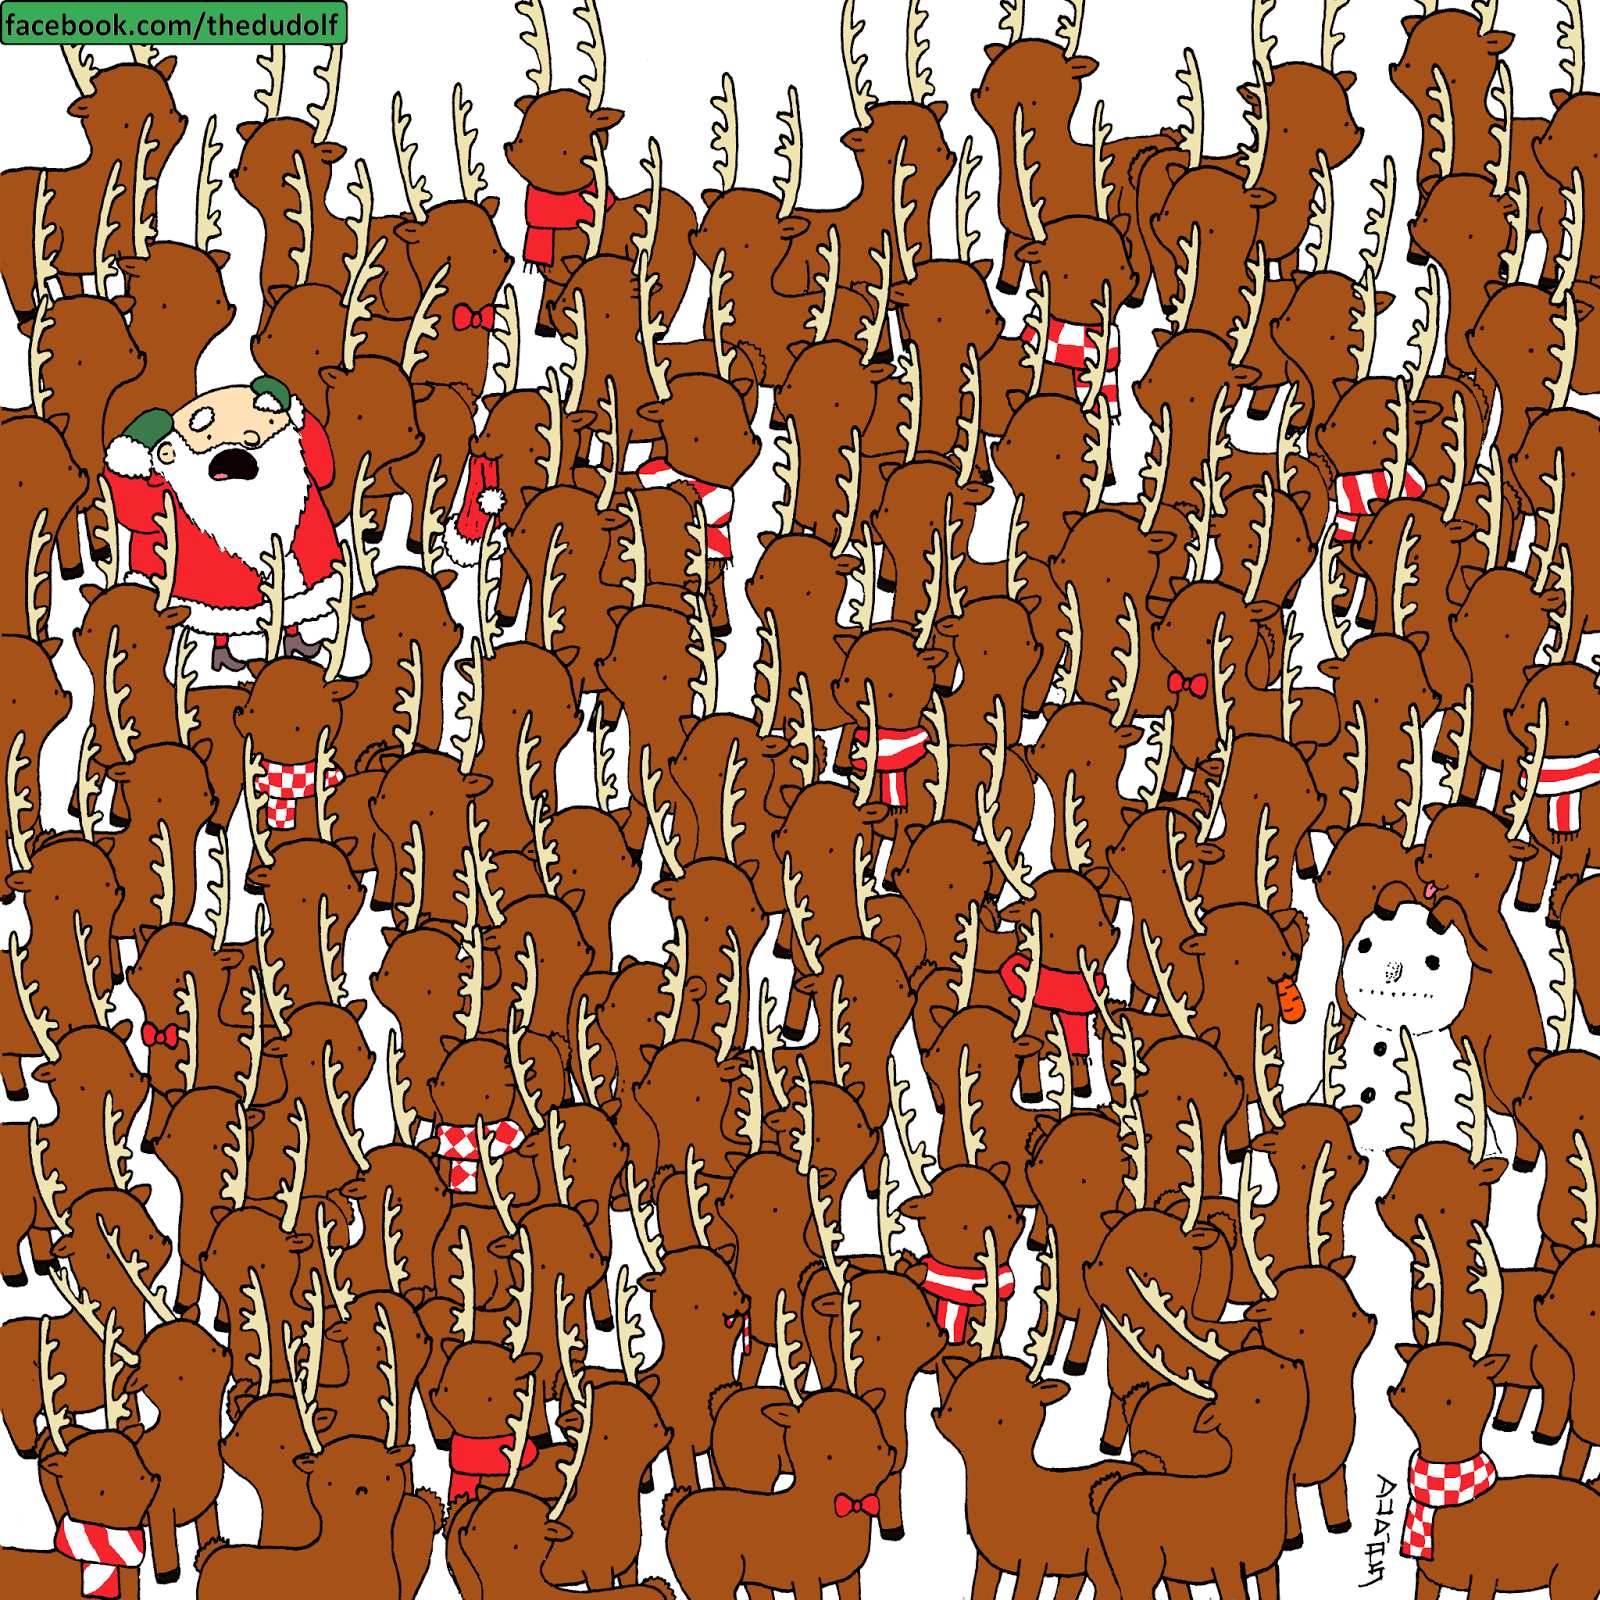 Can you find the bear among the deer in this visual challenge?